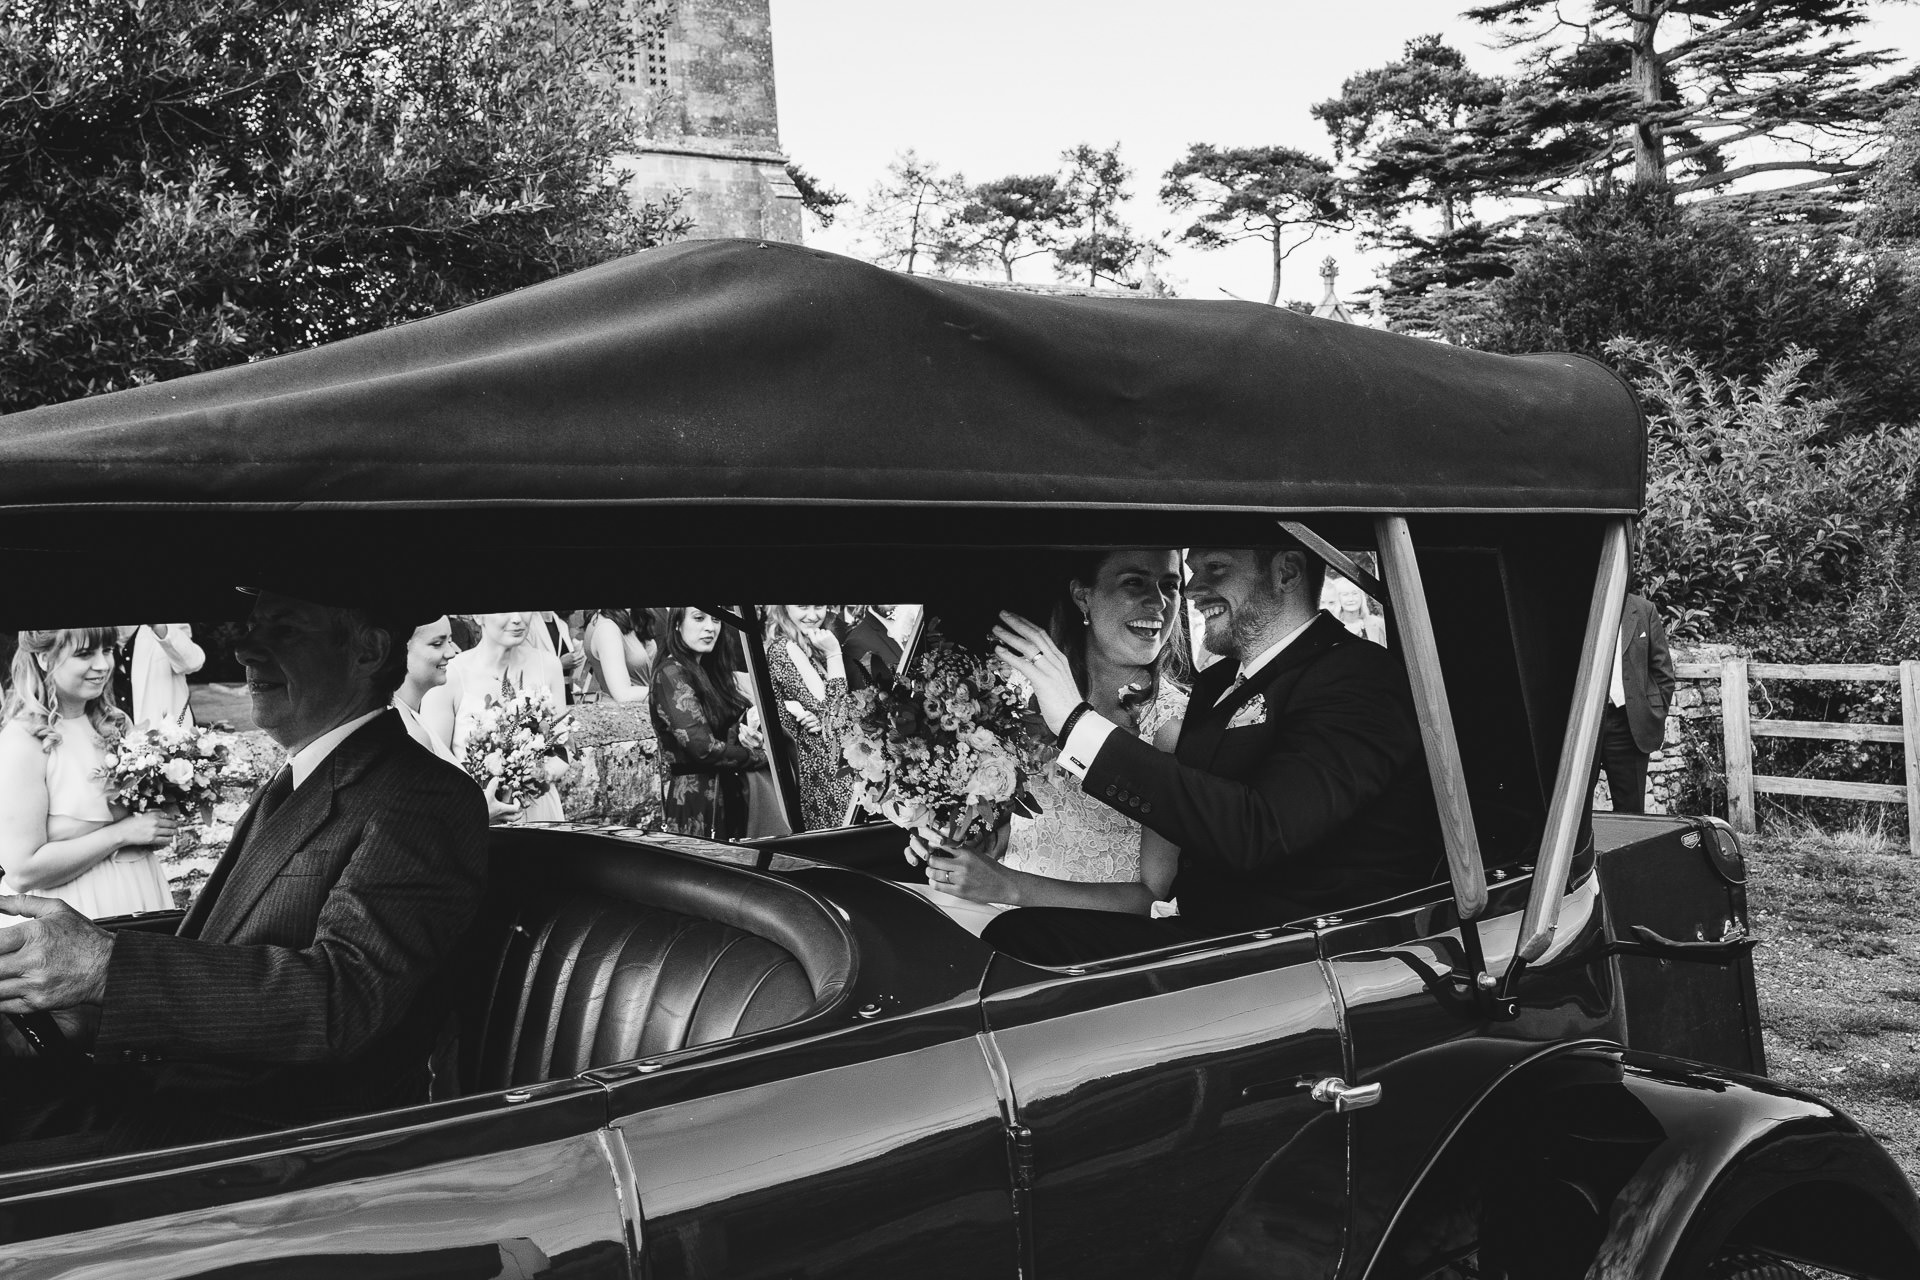 Bride and groom smiling at each other in a wedding car